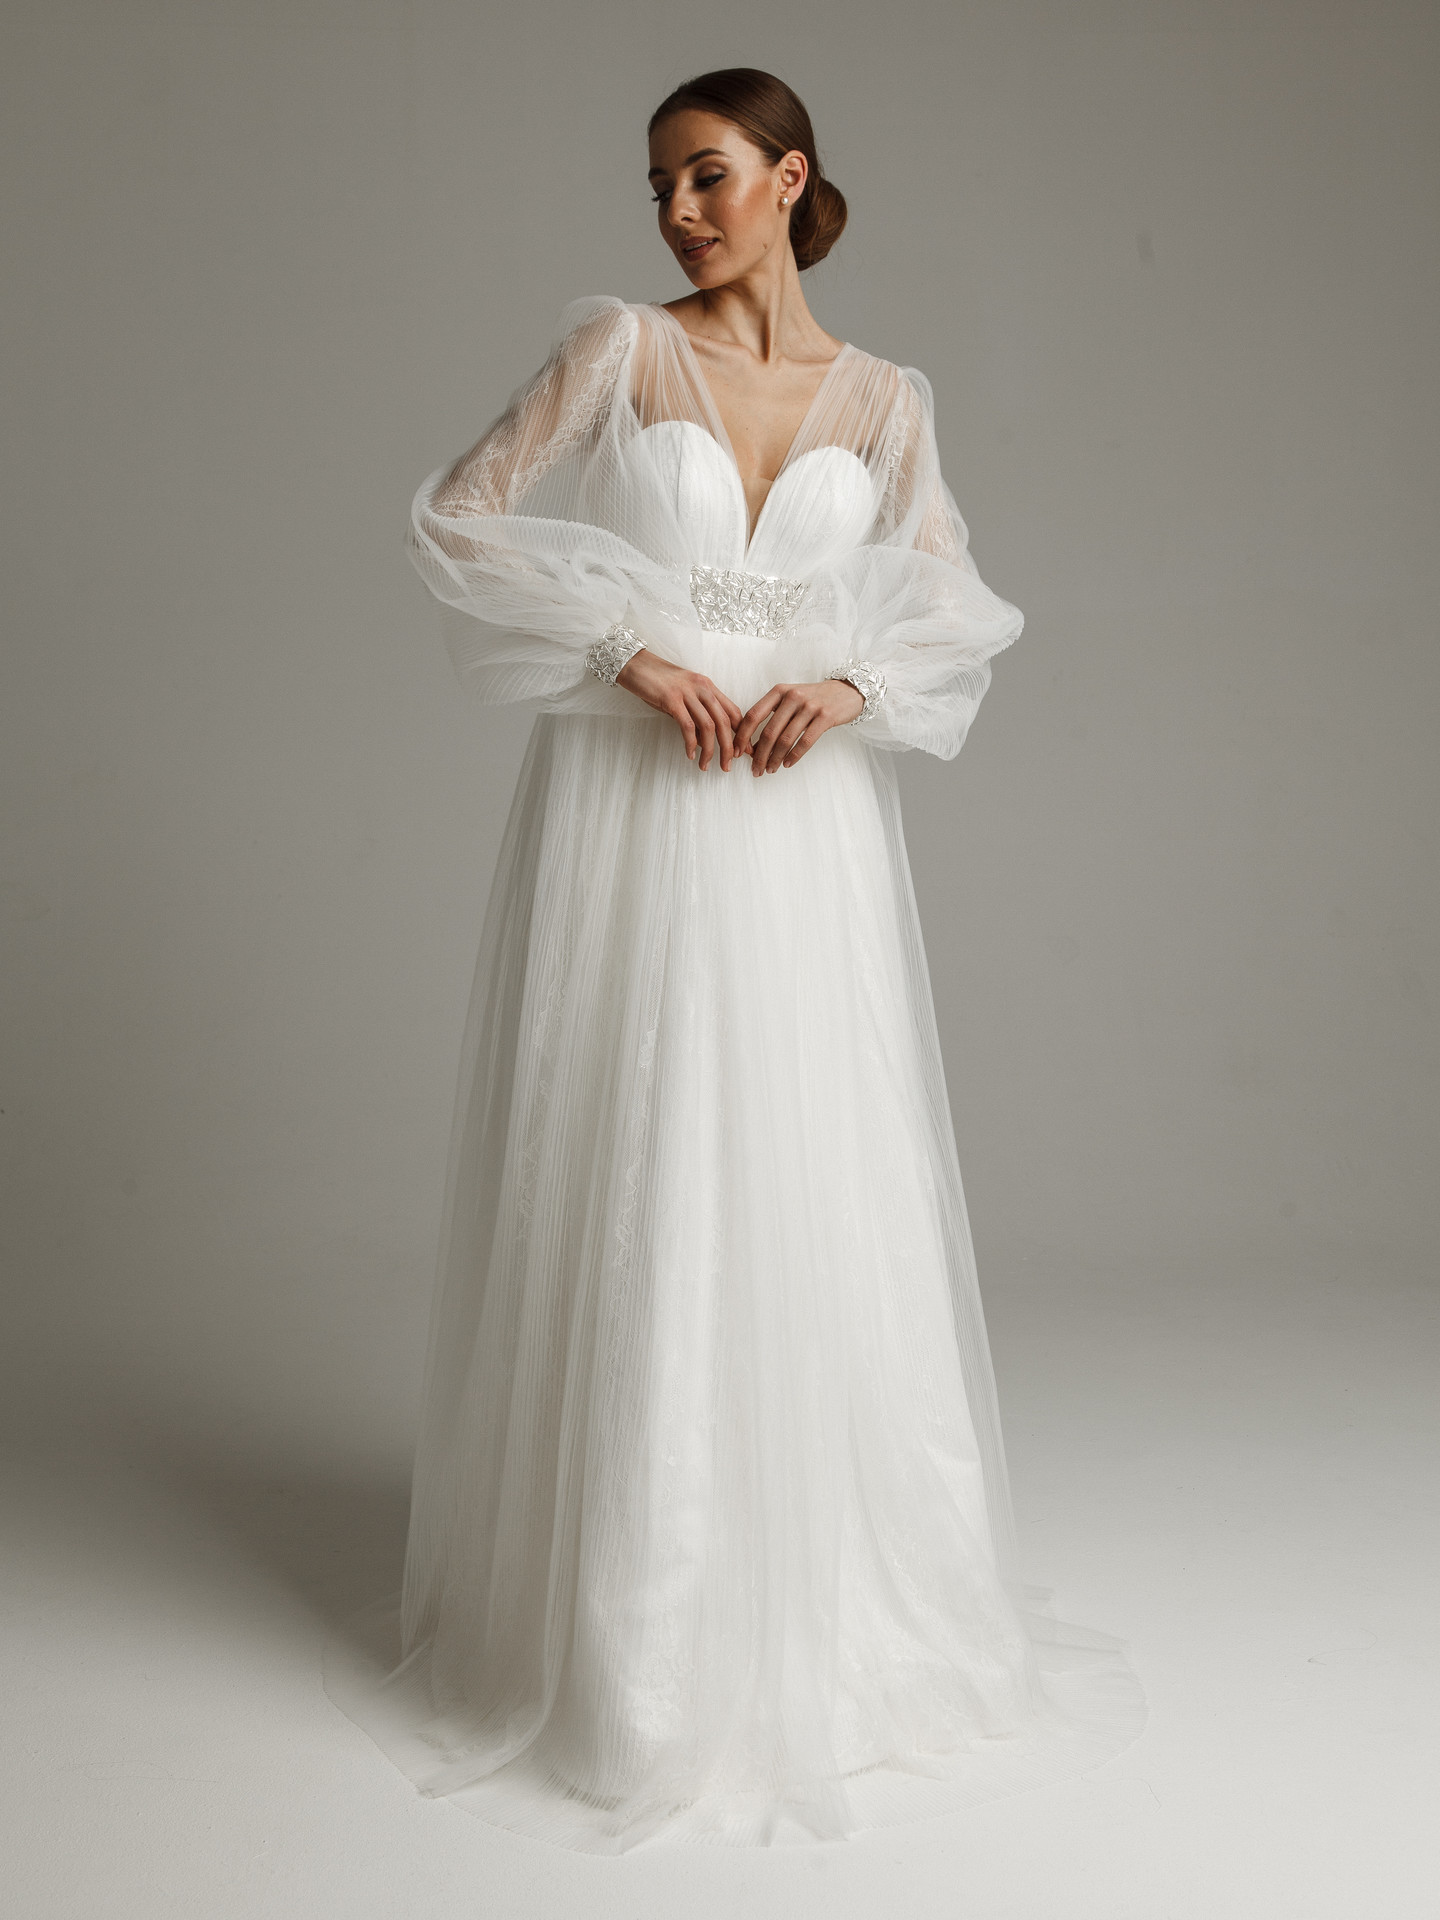 Loret gown, 2021, couture, dress, bridal, off-white, lace, A-line, embroidery, sleeves